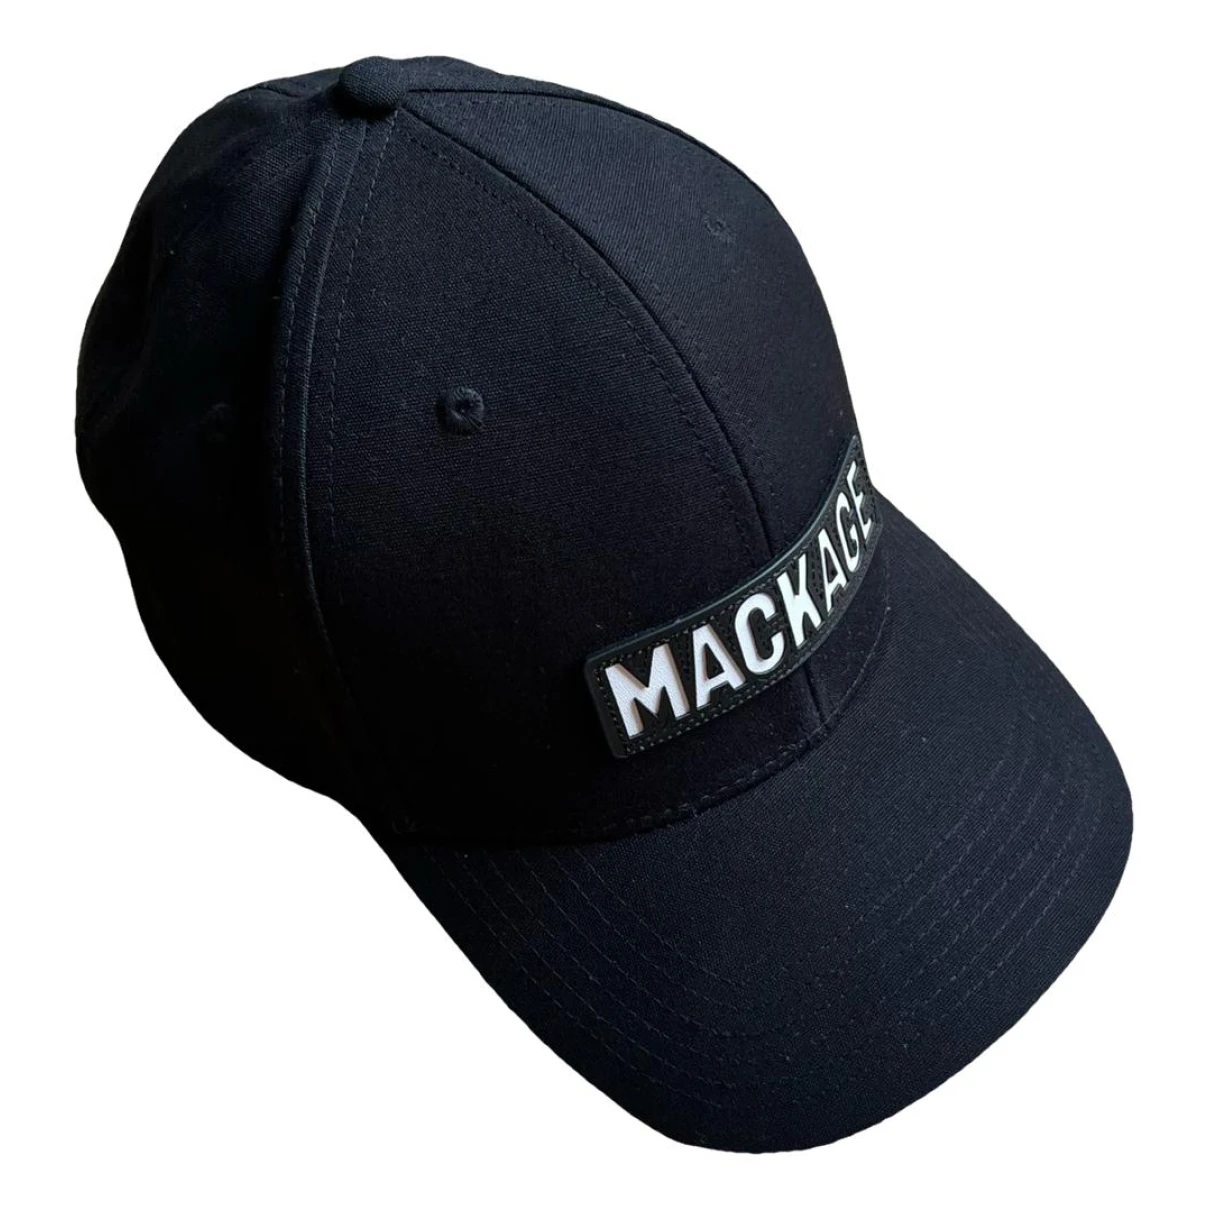 accessories Mackage hats & pull on hats for Male Cotton 54 cm. Used condition